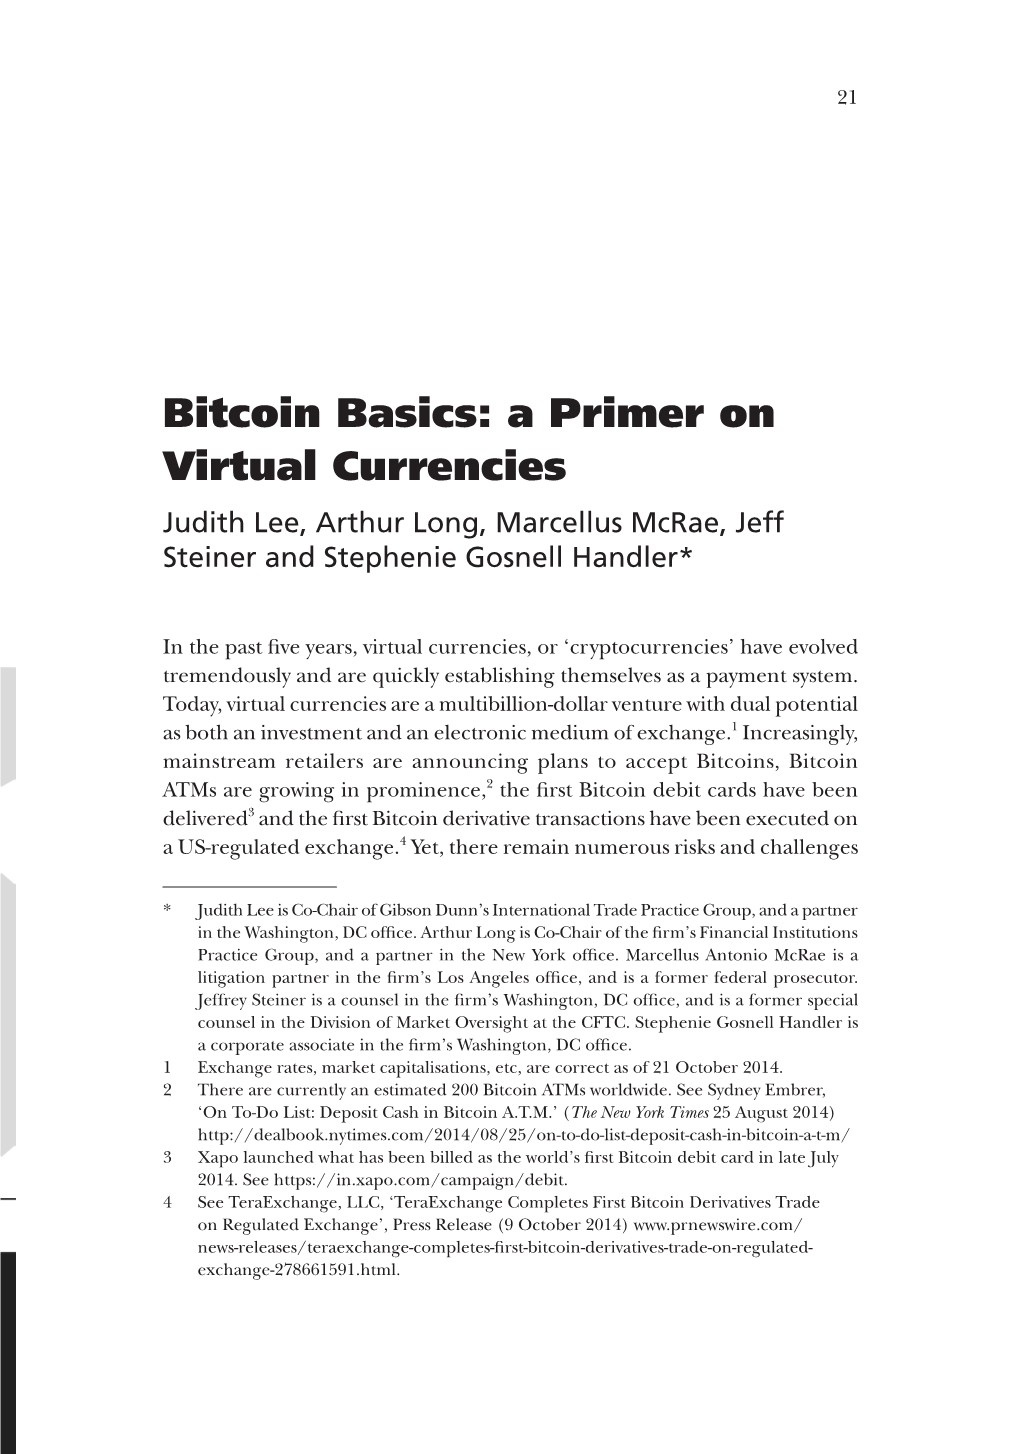 Bitcoin Basics: a Primer on Virtual Currencies Judith Lee, Arthur Long, Marcellus Mcrae, Jeff Steiner and Stephenie Gosnell Handler*